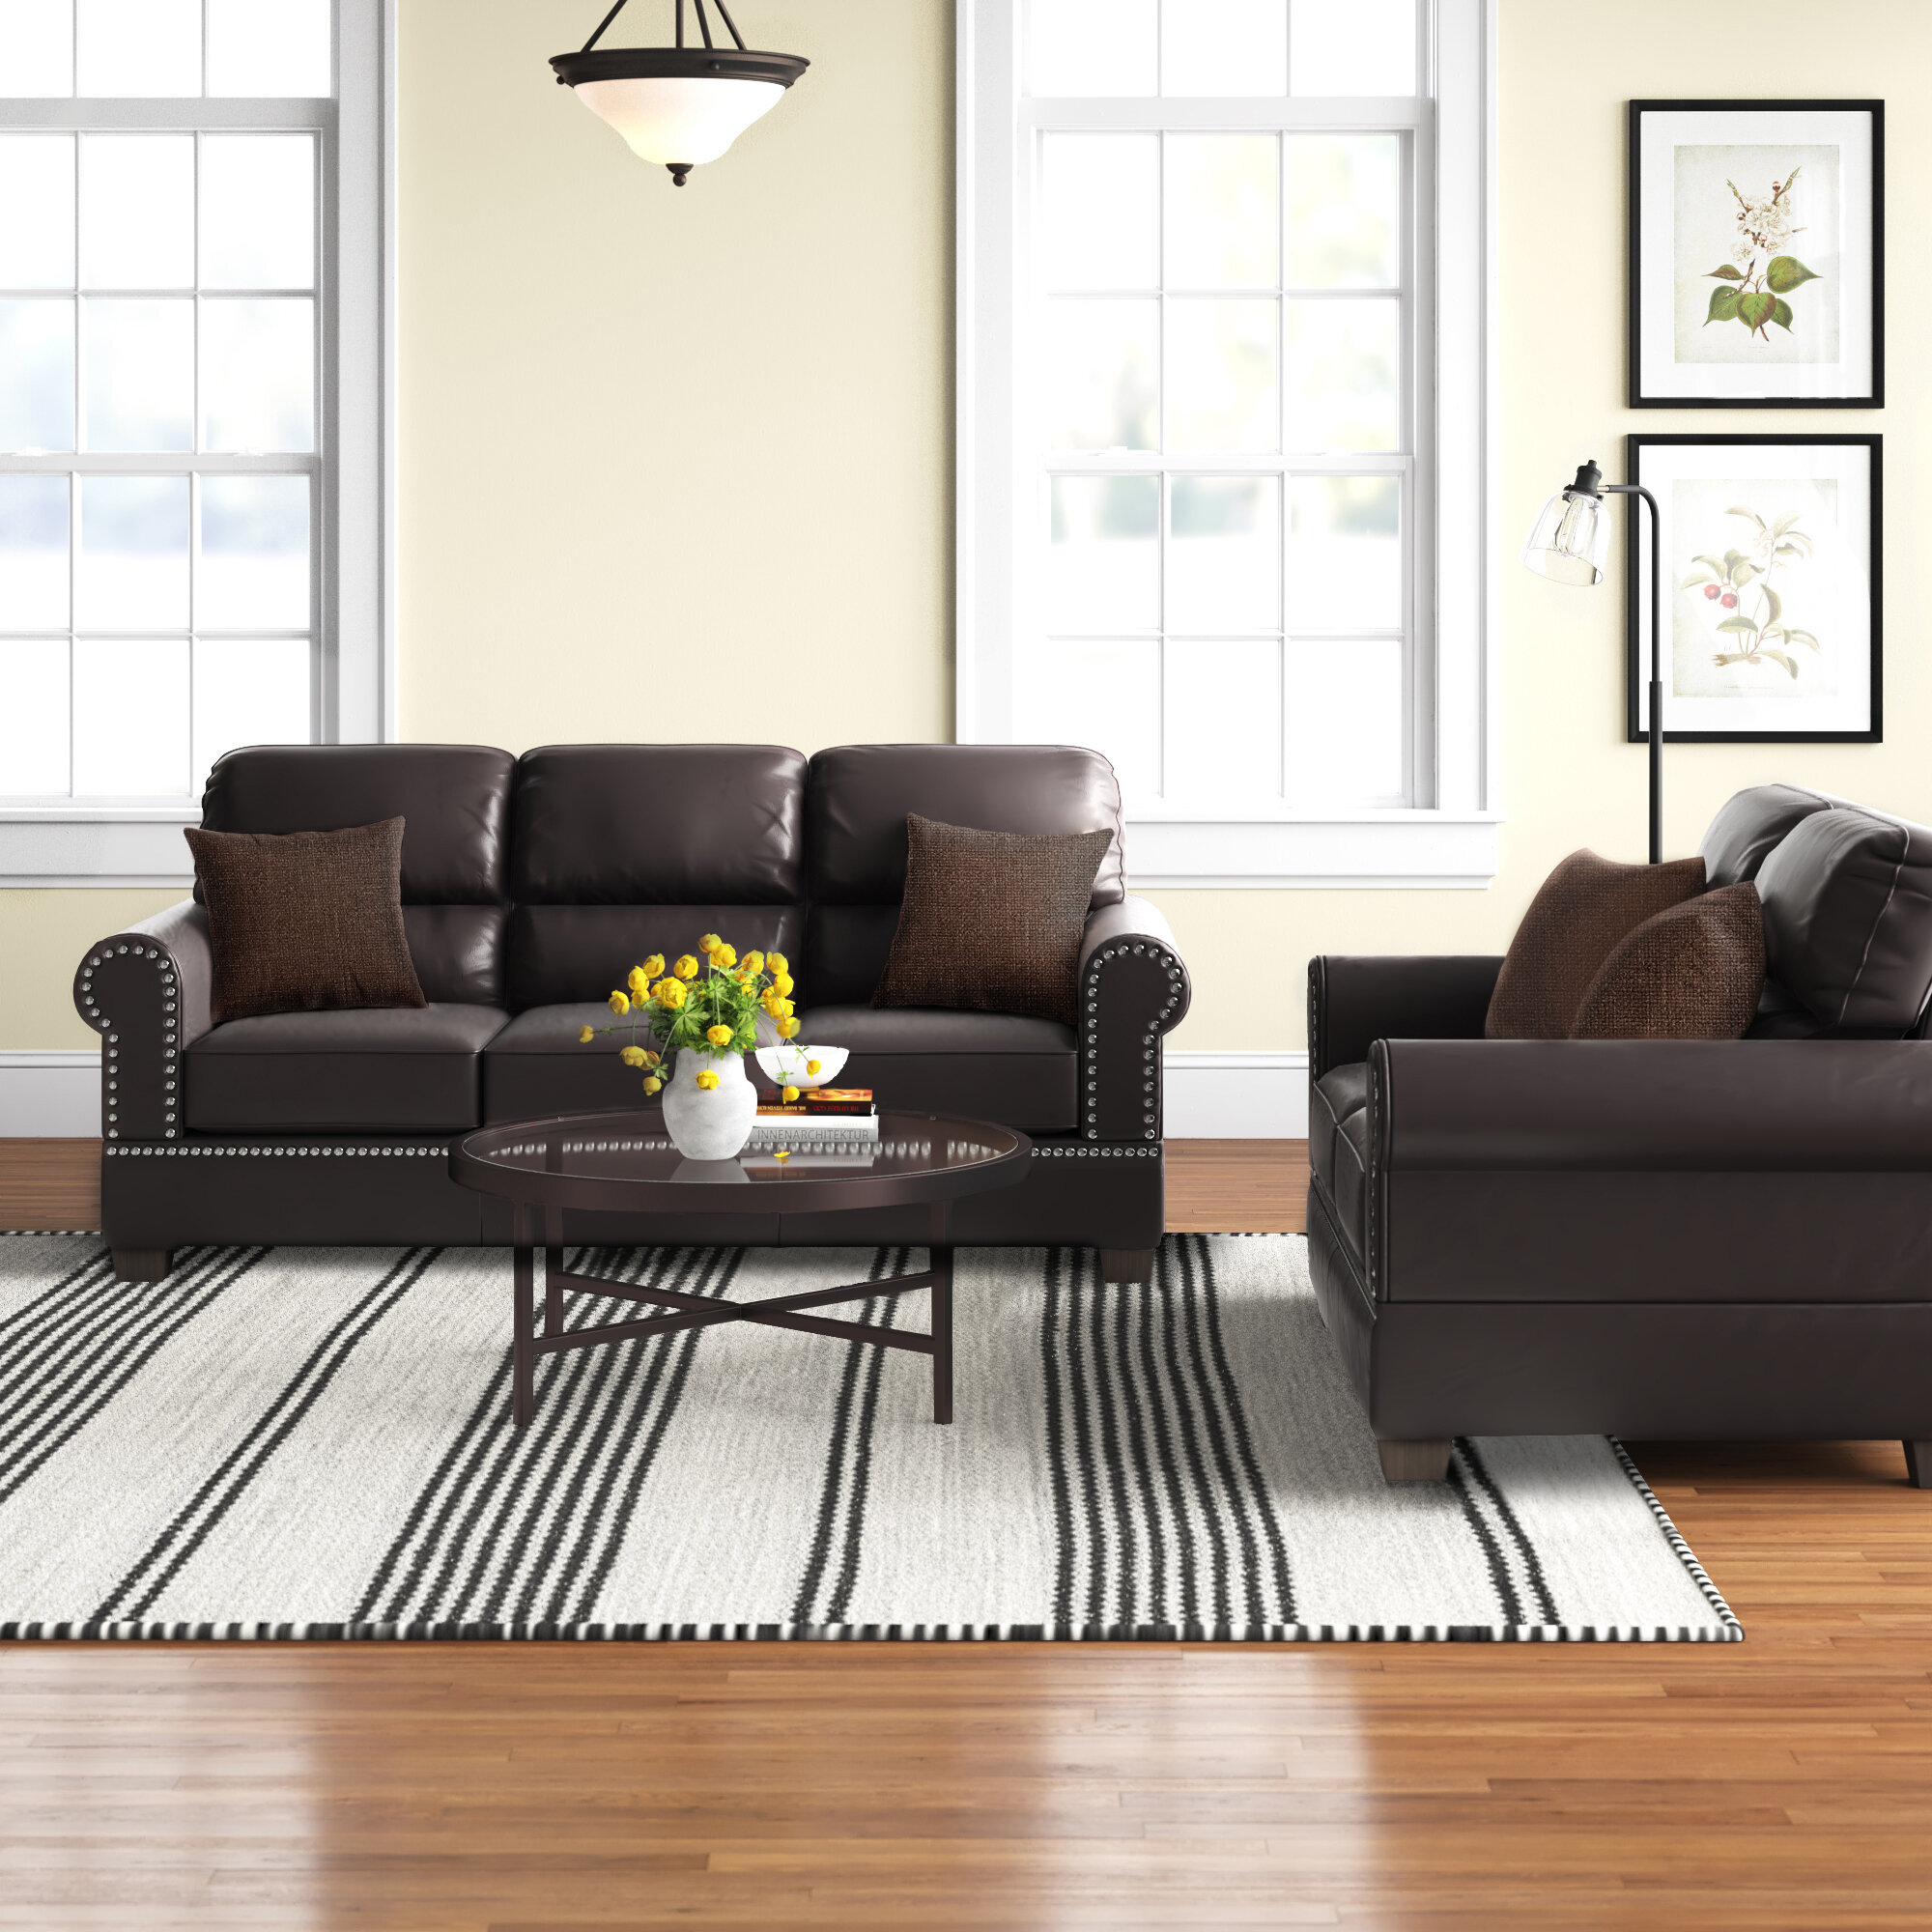 Boyster 2 Piece Faux Leather Living Room Set